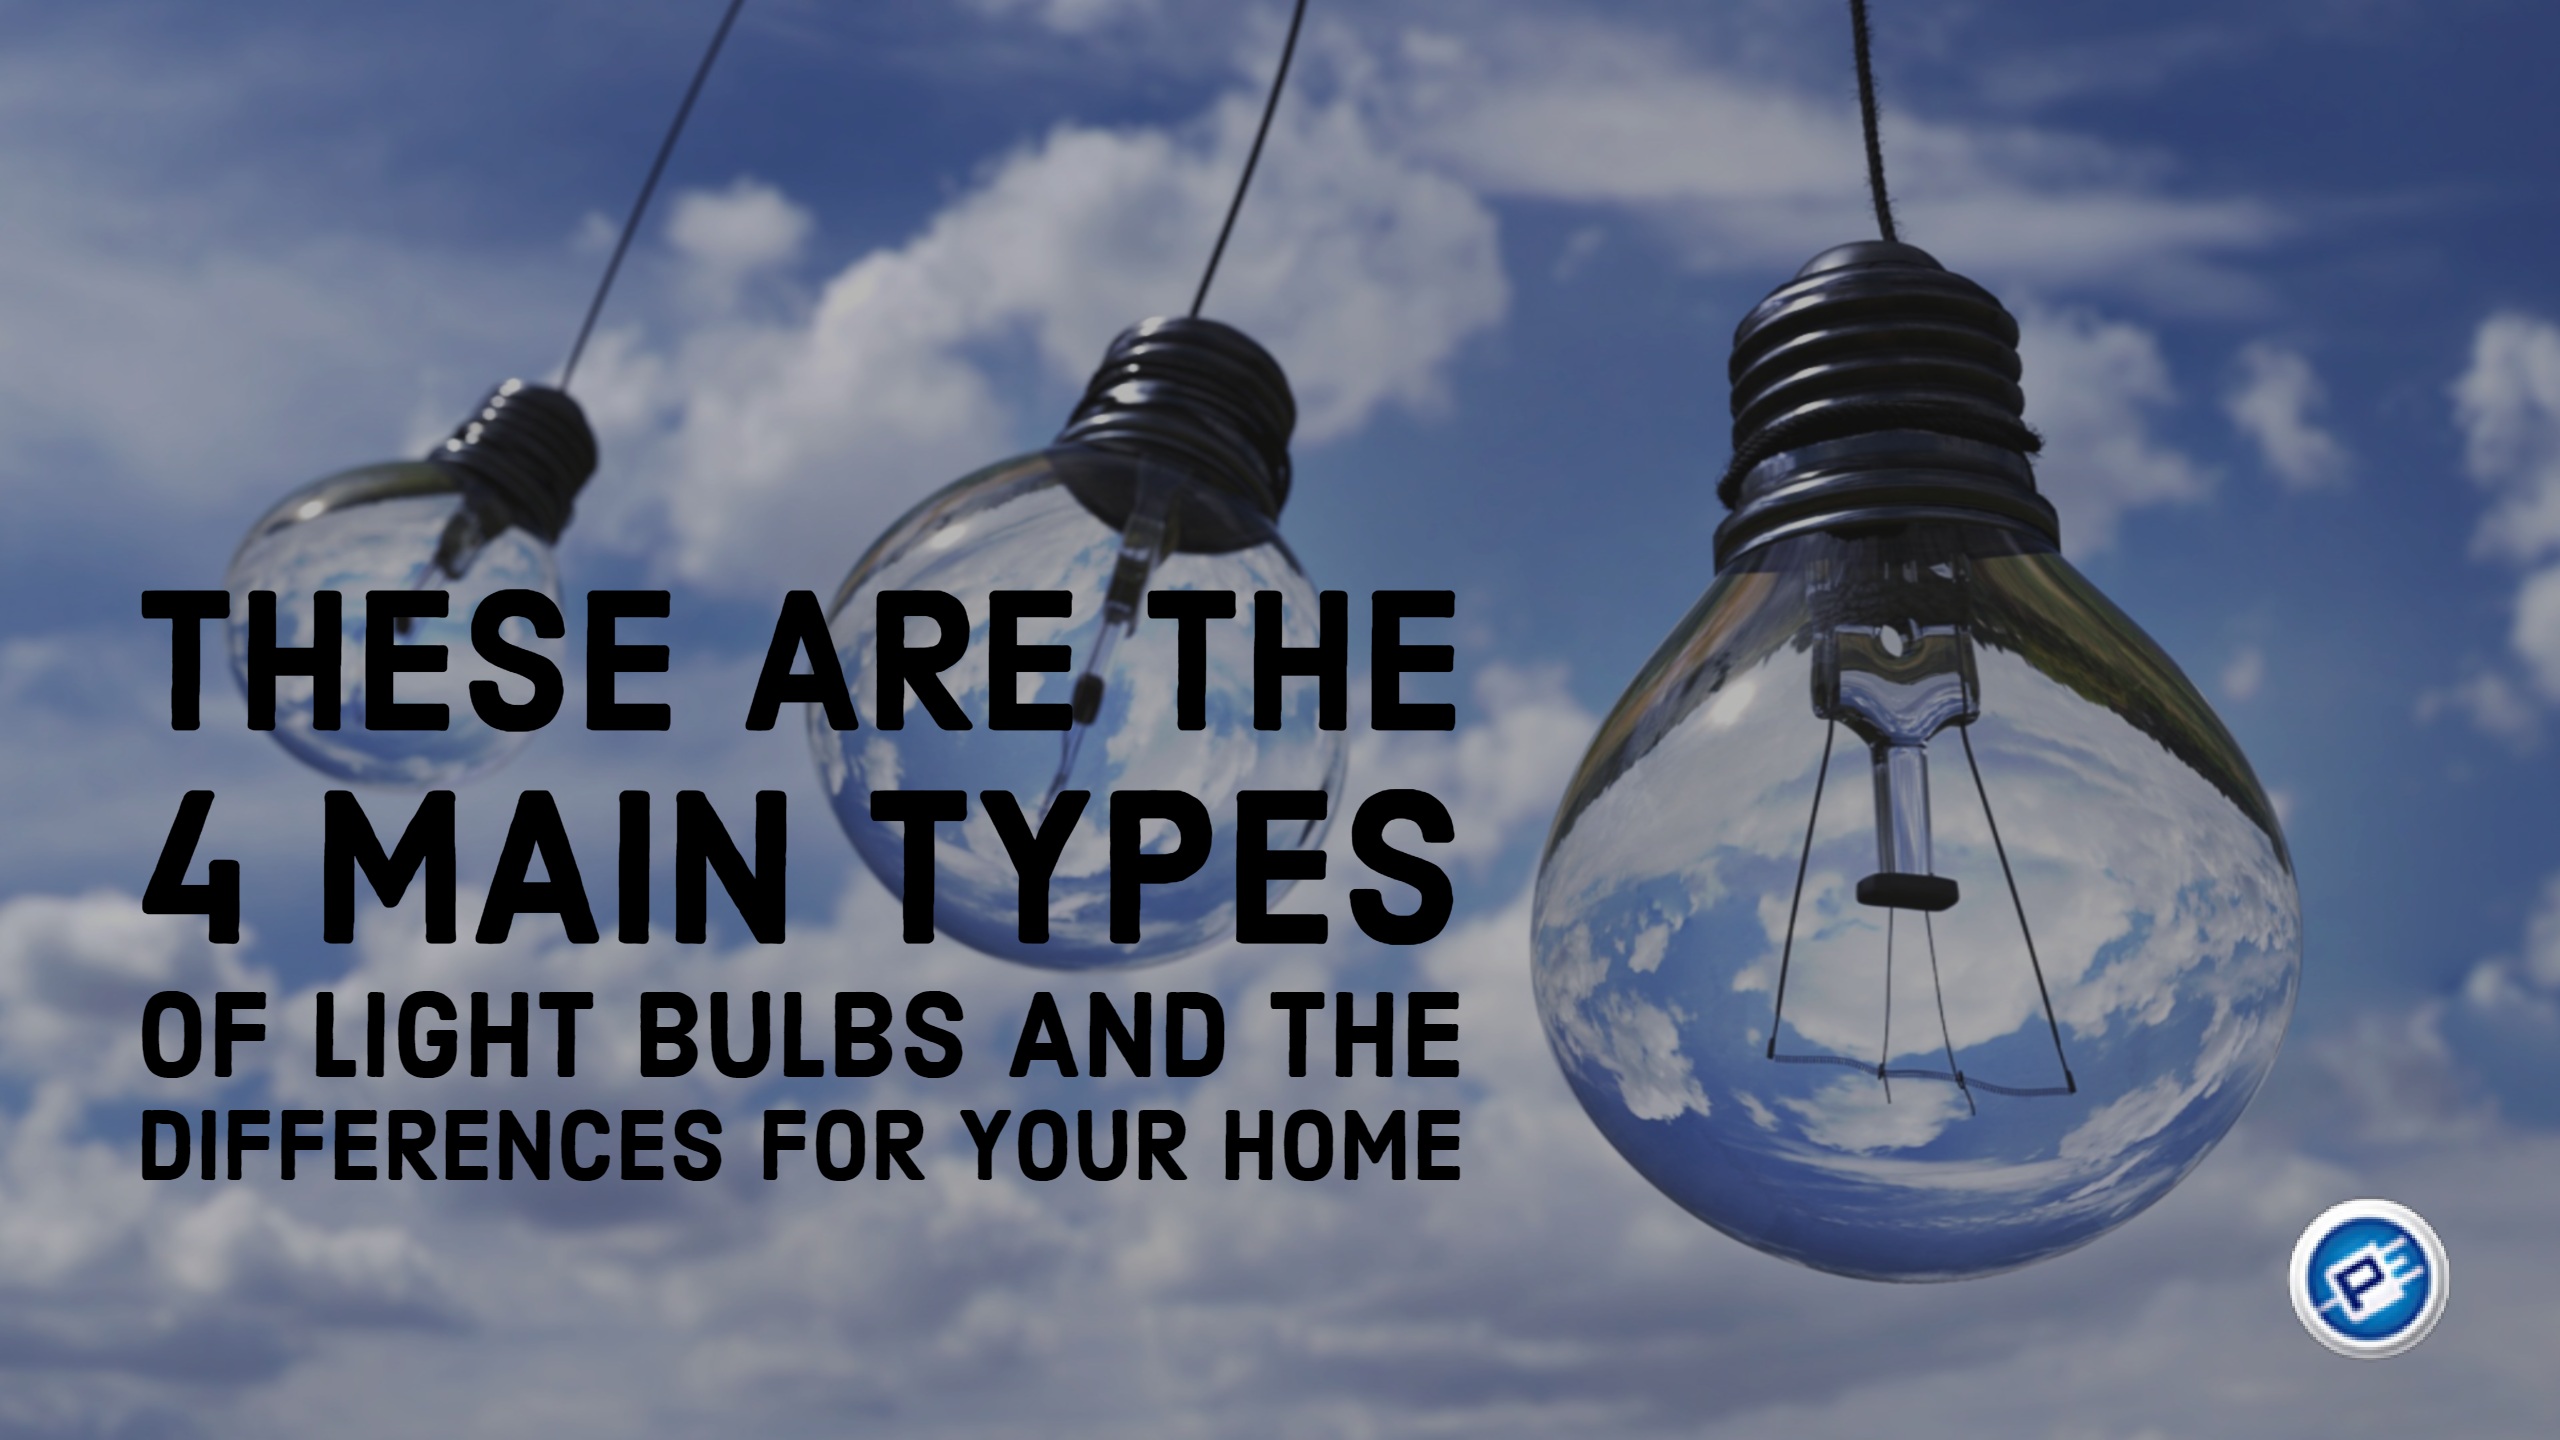 The 4 main types of light bulbs and differences for your home